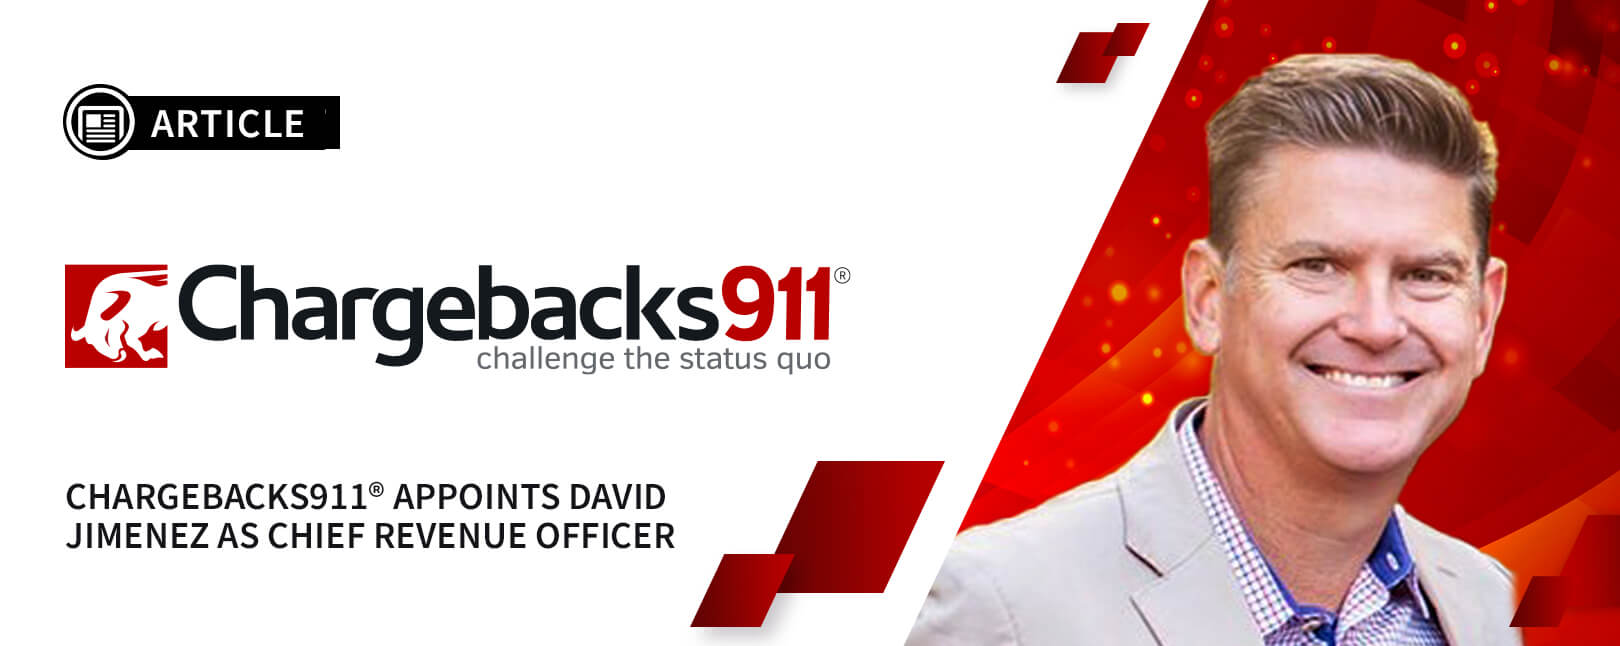 Chargebacks911® Appoints David Jimenez as Chief Revenue Officer